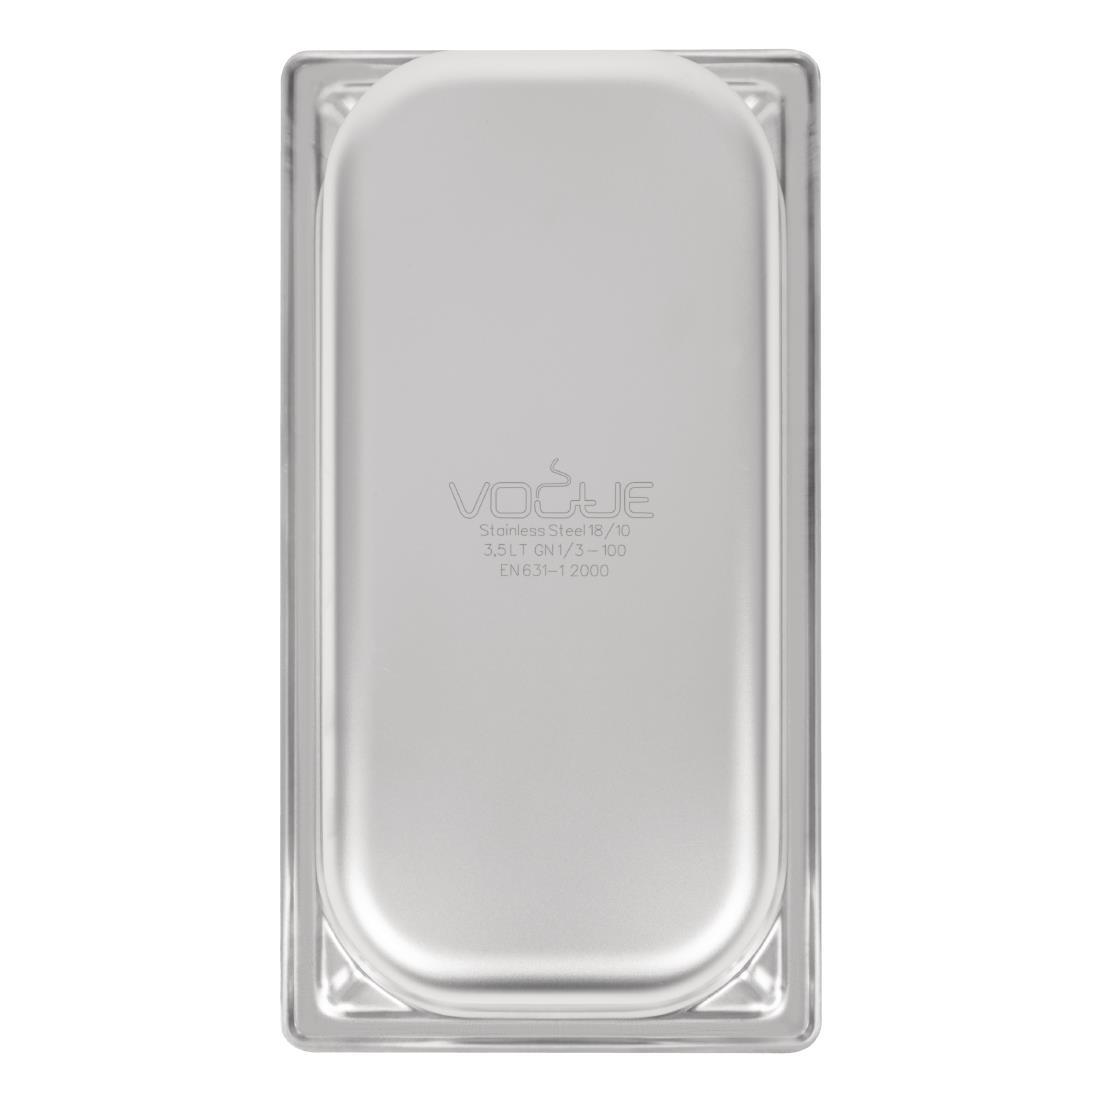 Vogue Heavy Duty Stainless Steel 1/3 Gastronorm Pan 100mm - DW443  - 6